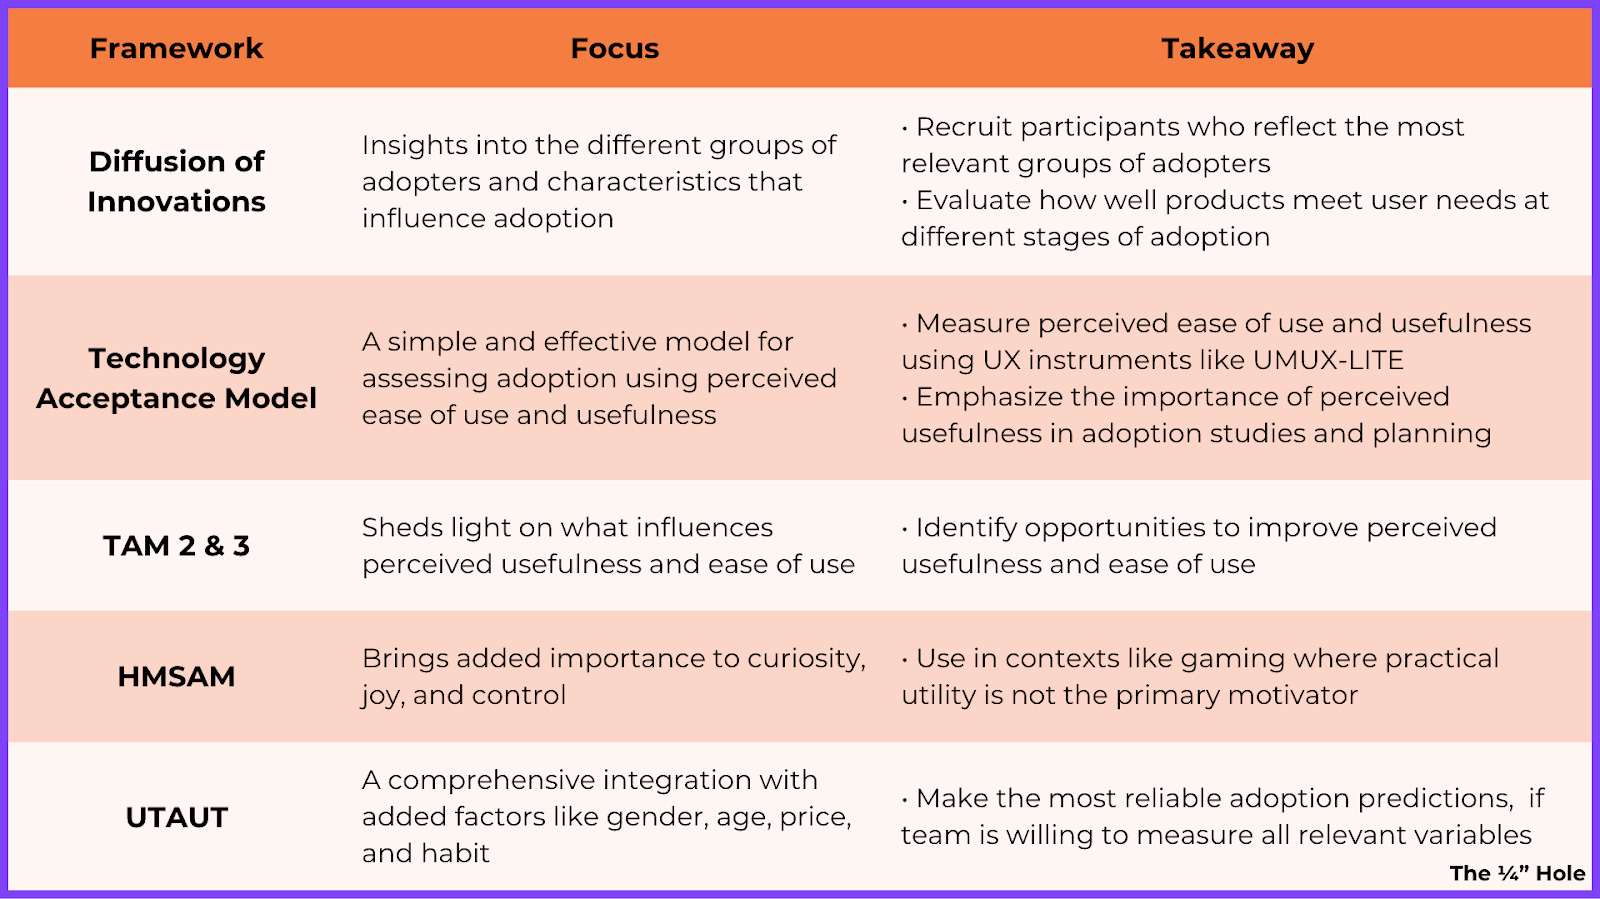 A tabular summary of the five models discussed in this article, their specific focus, and the practical takeaways for UX teams suggested previously.